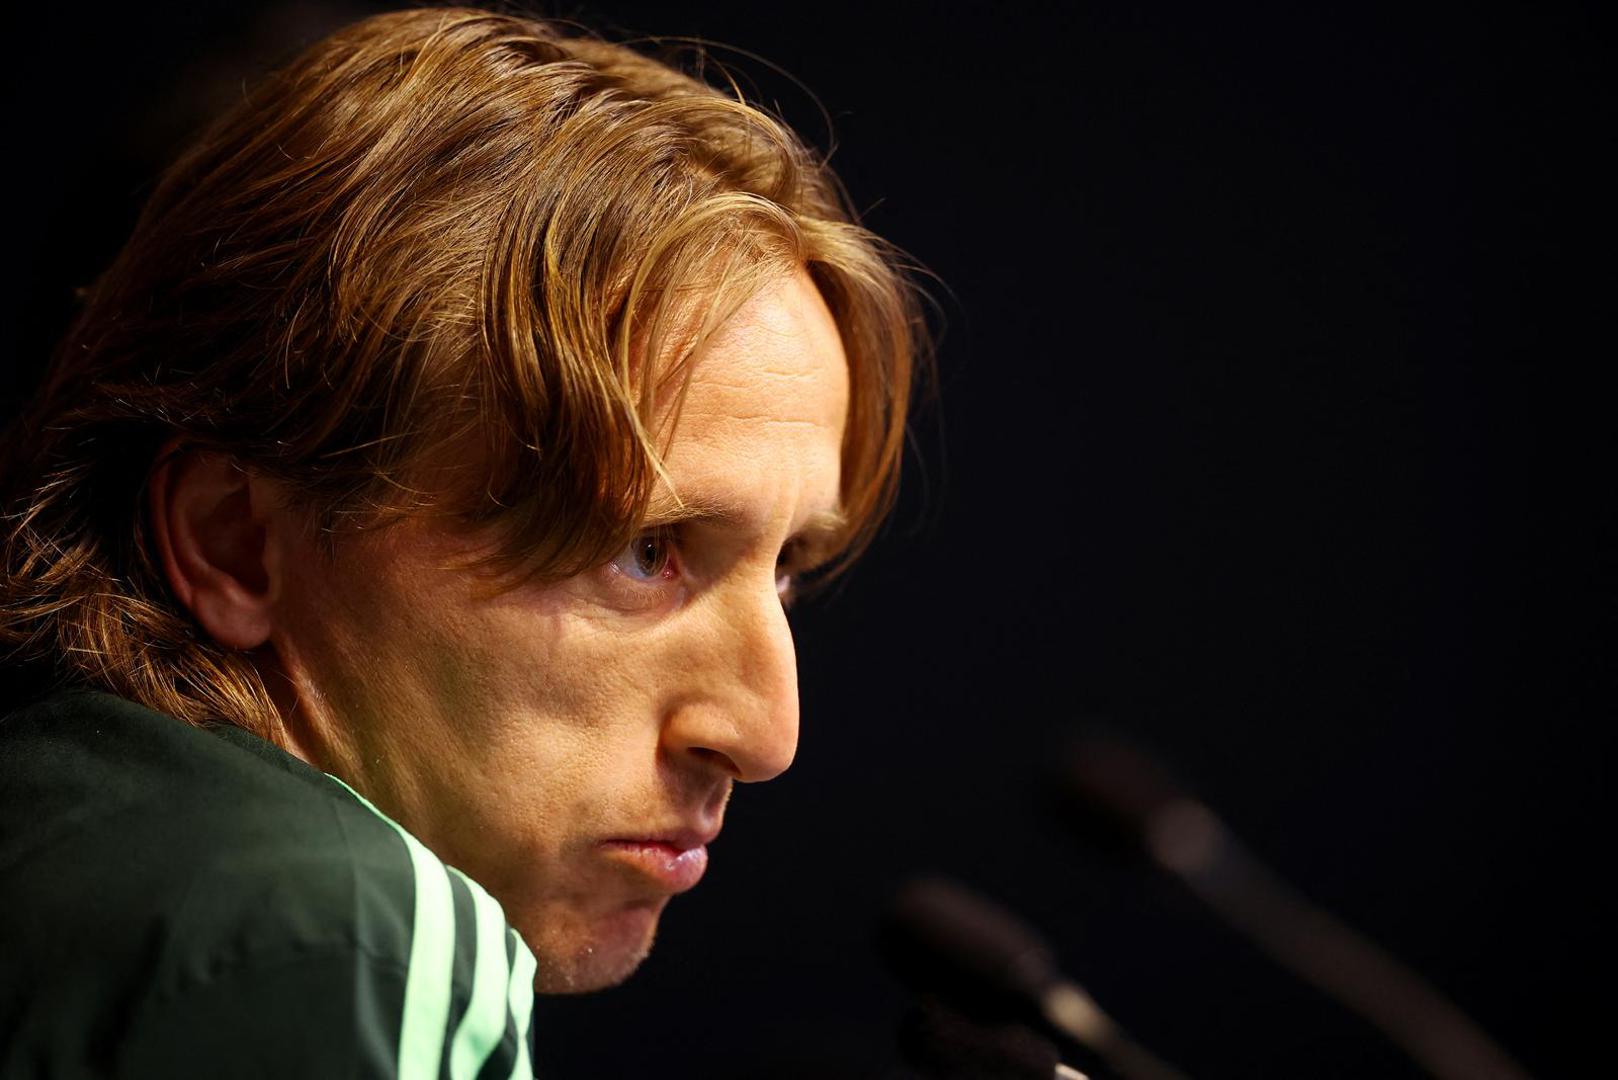 Soccer Football - Champions League - Real Madrid press conference - Etihad Stadium, Manchester, Britain - May 16, 2023 Real Madrid's Luka Modric during the press conference REUTERS/Carl Recine Photo: Carl Recine/REUTERS